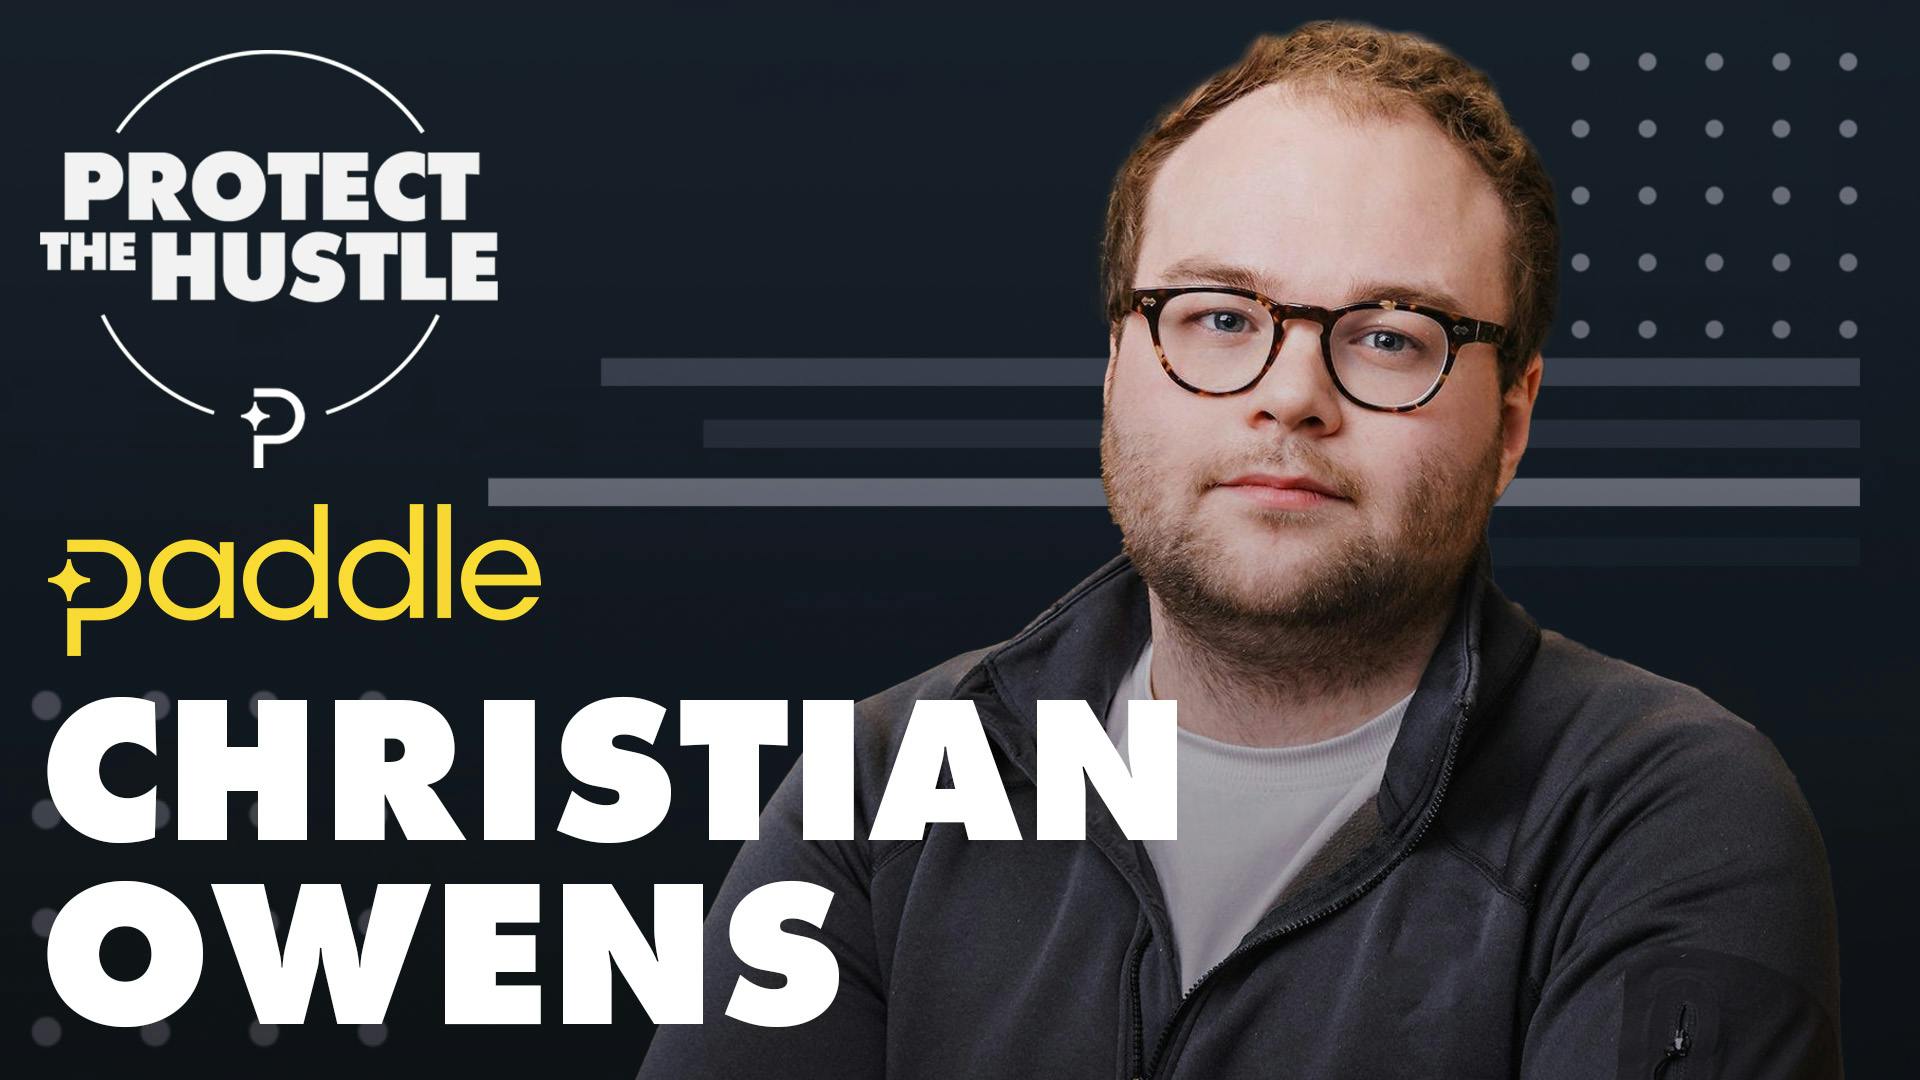 Protect the Hustle thumbnail featuring Paddle's Christian Owens